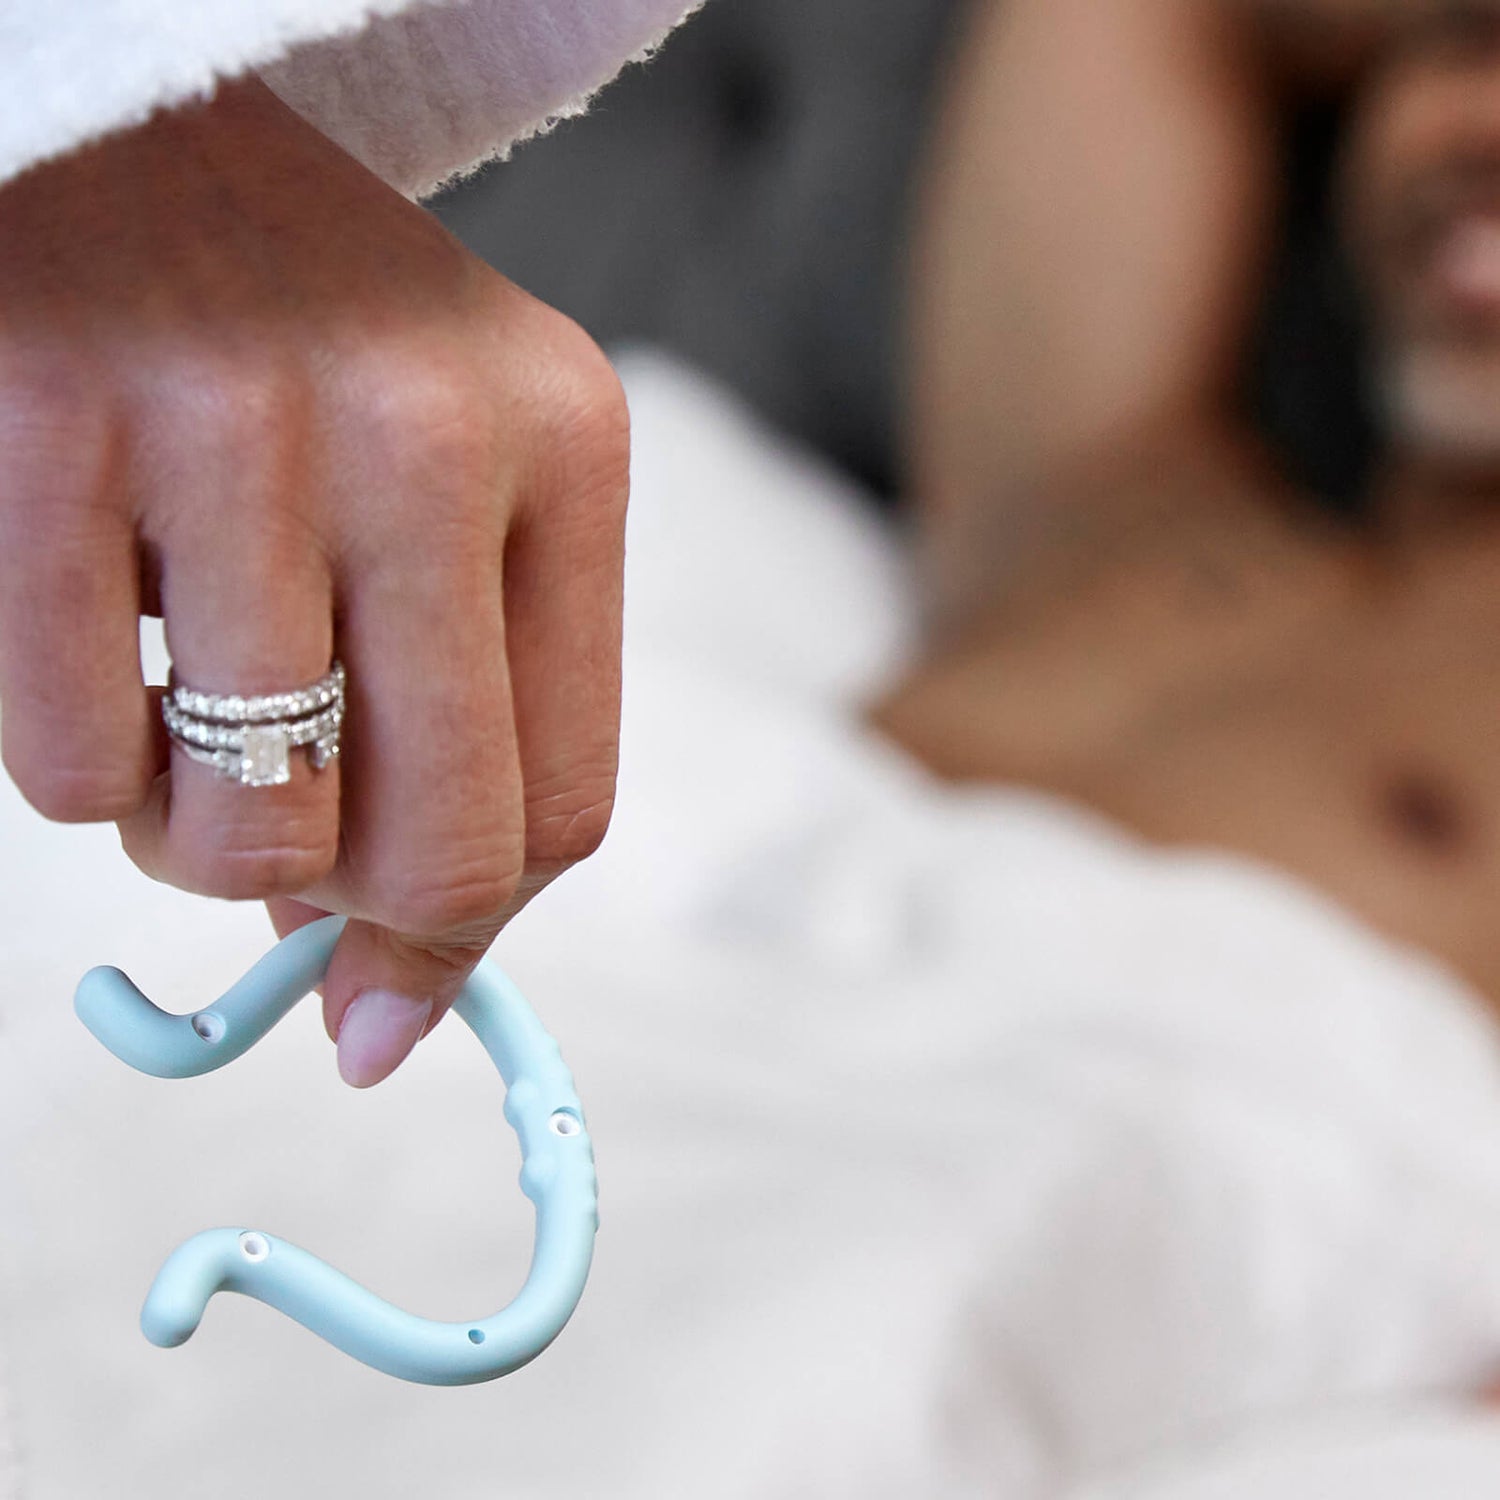 Woman with Wedding Ring Holding Eddie Next to Husband in Bed